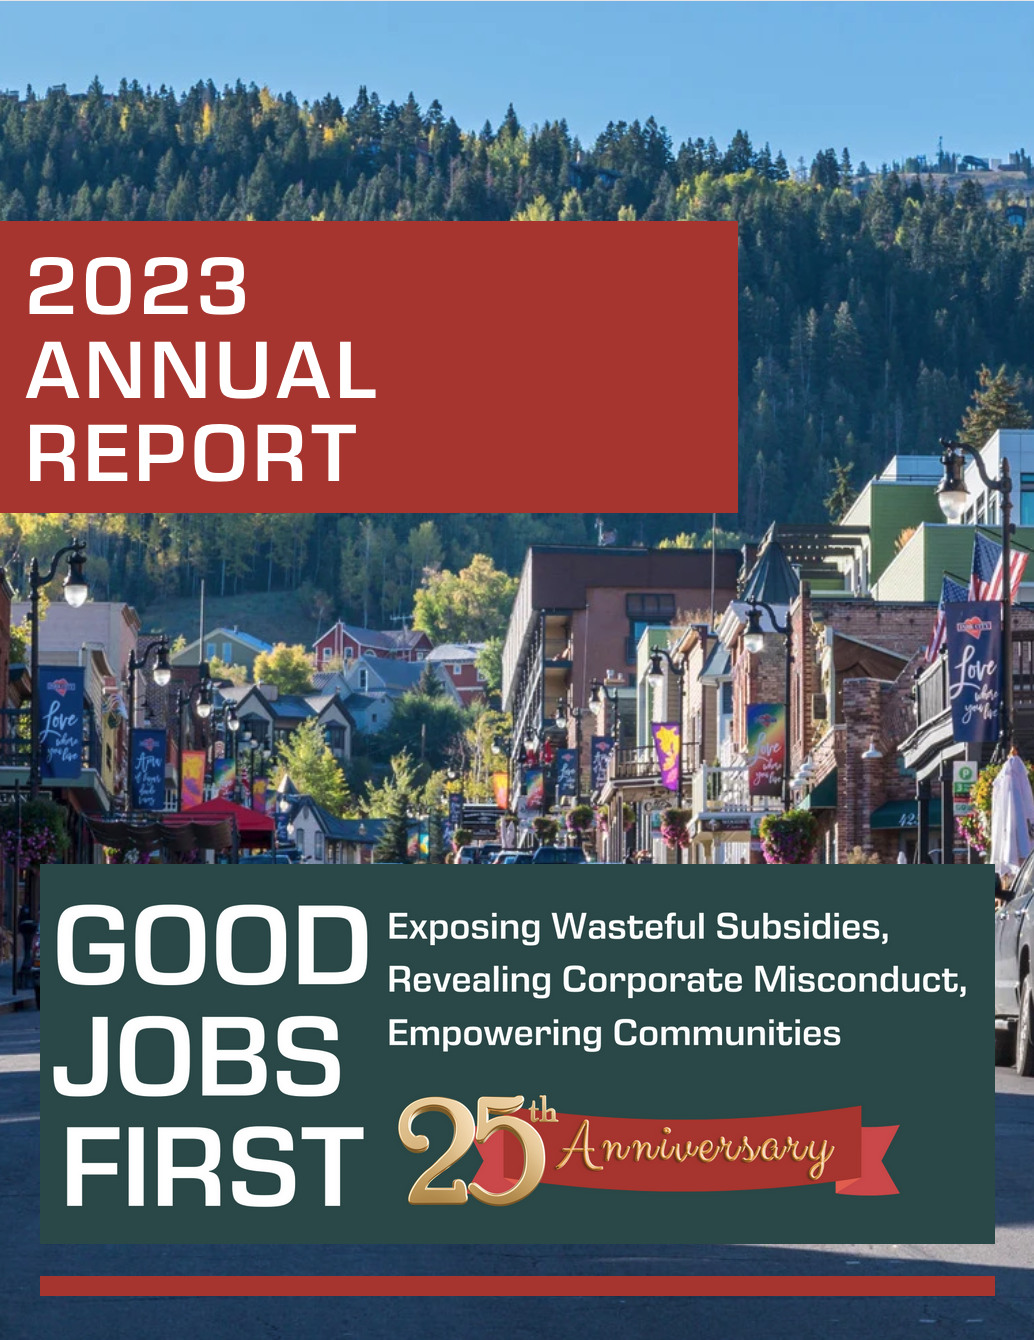 2023 Annual Report: Good Jobs First Turns 25